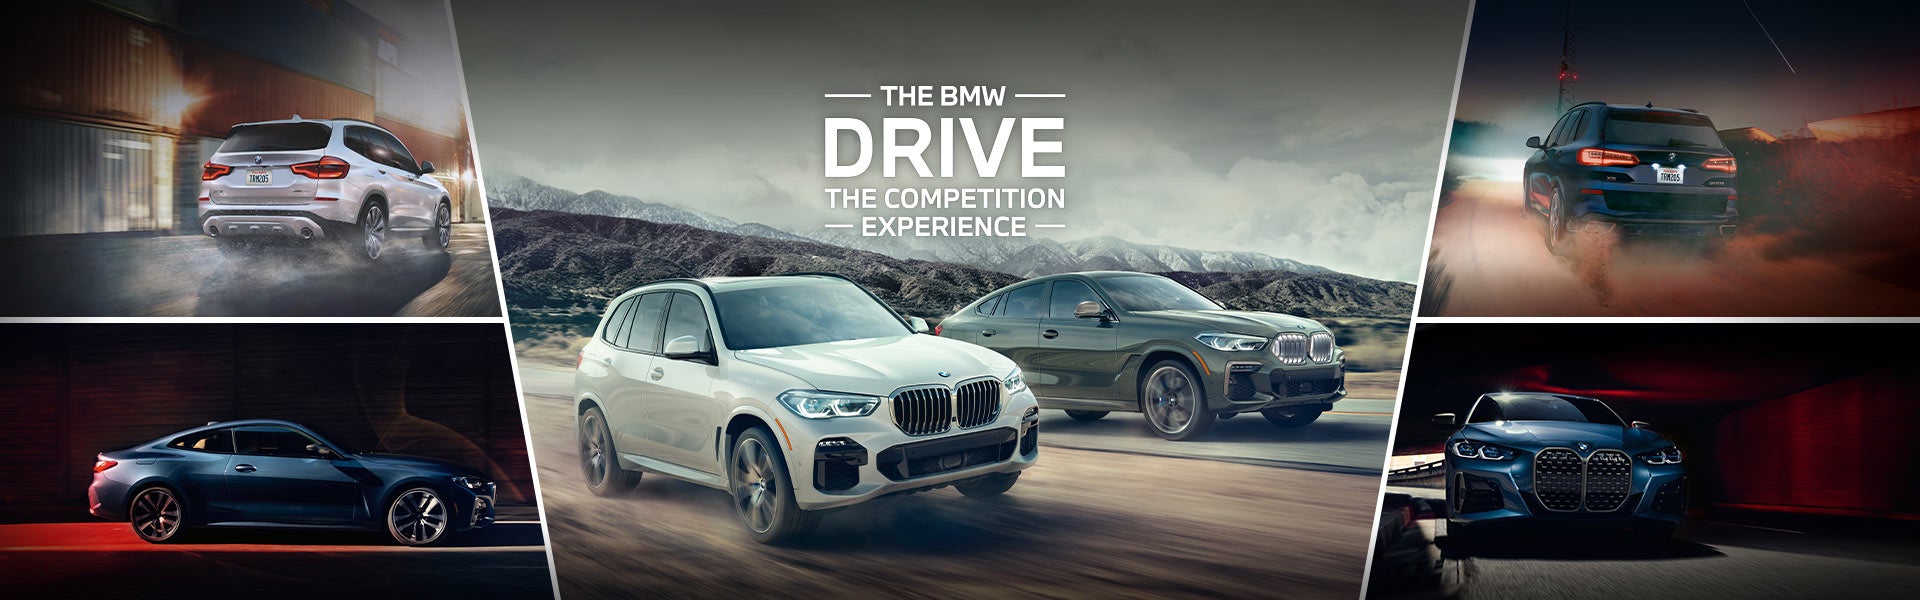 BMW Drive Competition Experience | BMW of Tallahassee in Tallahassee FL